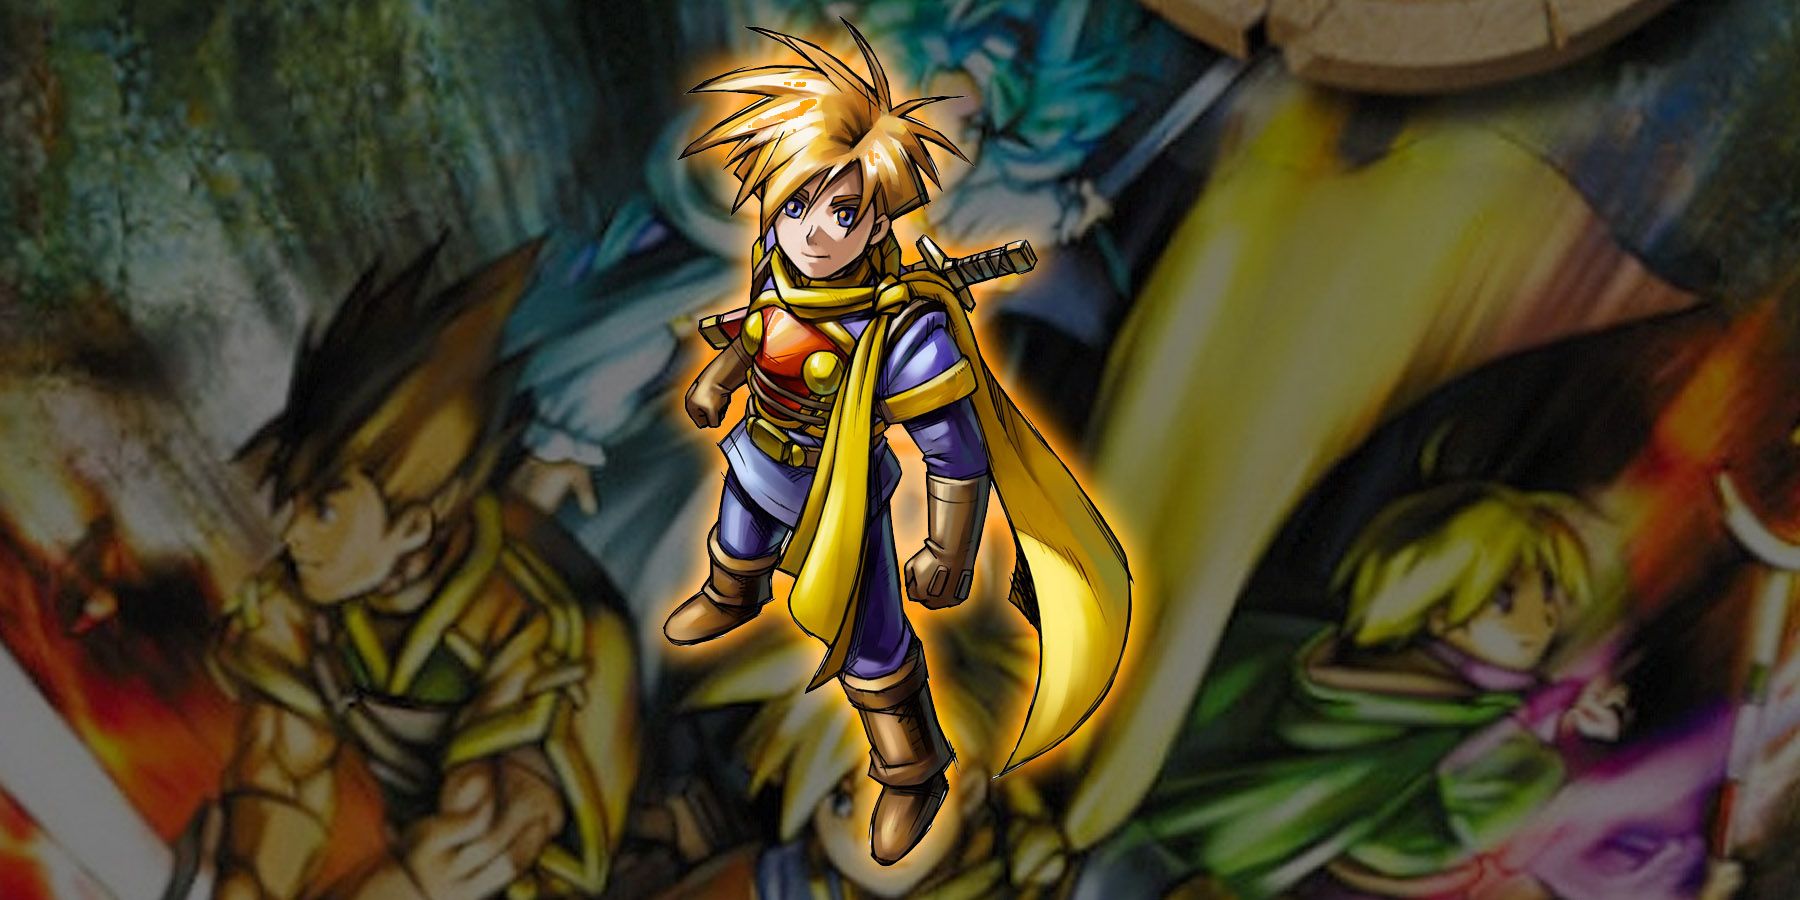 A Golden Sun protagonist who can become a Ninja